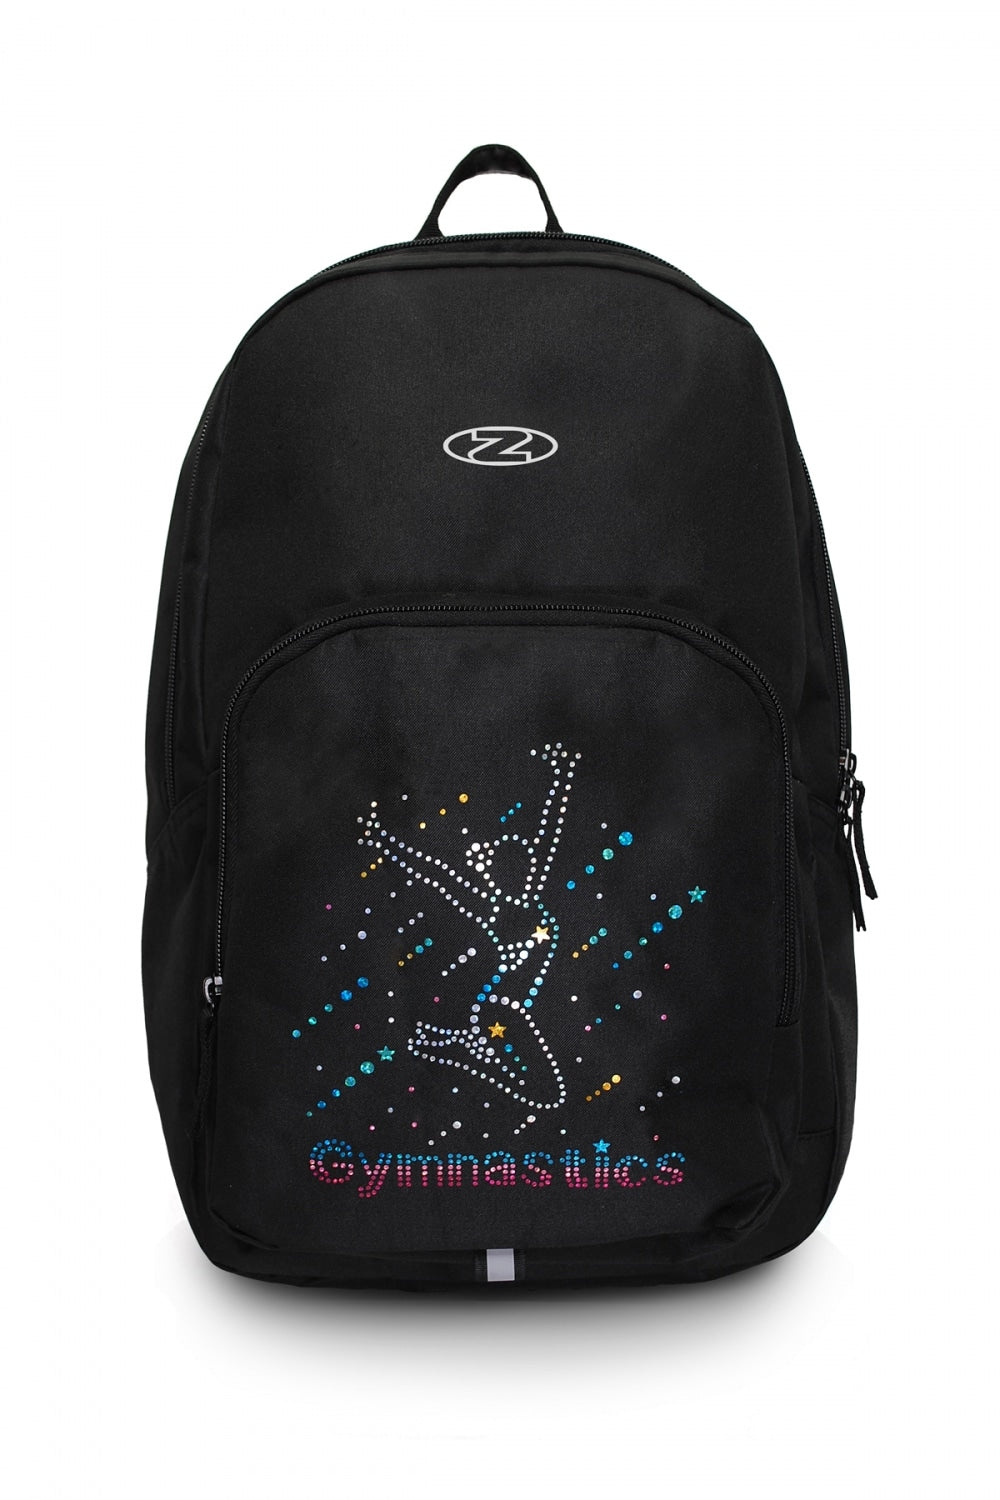 The Zone Gymnastics Back Pack